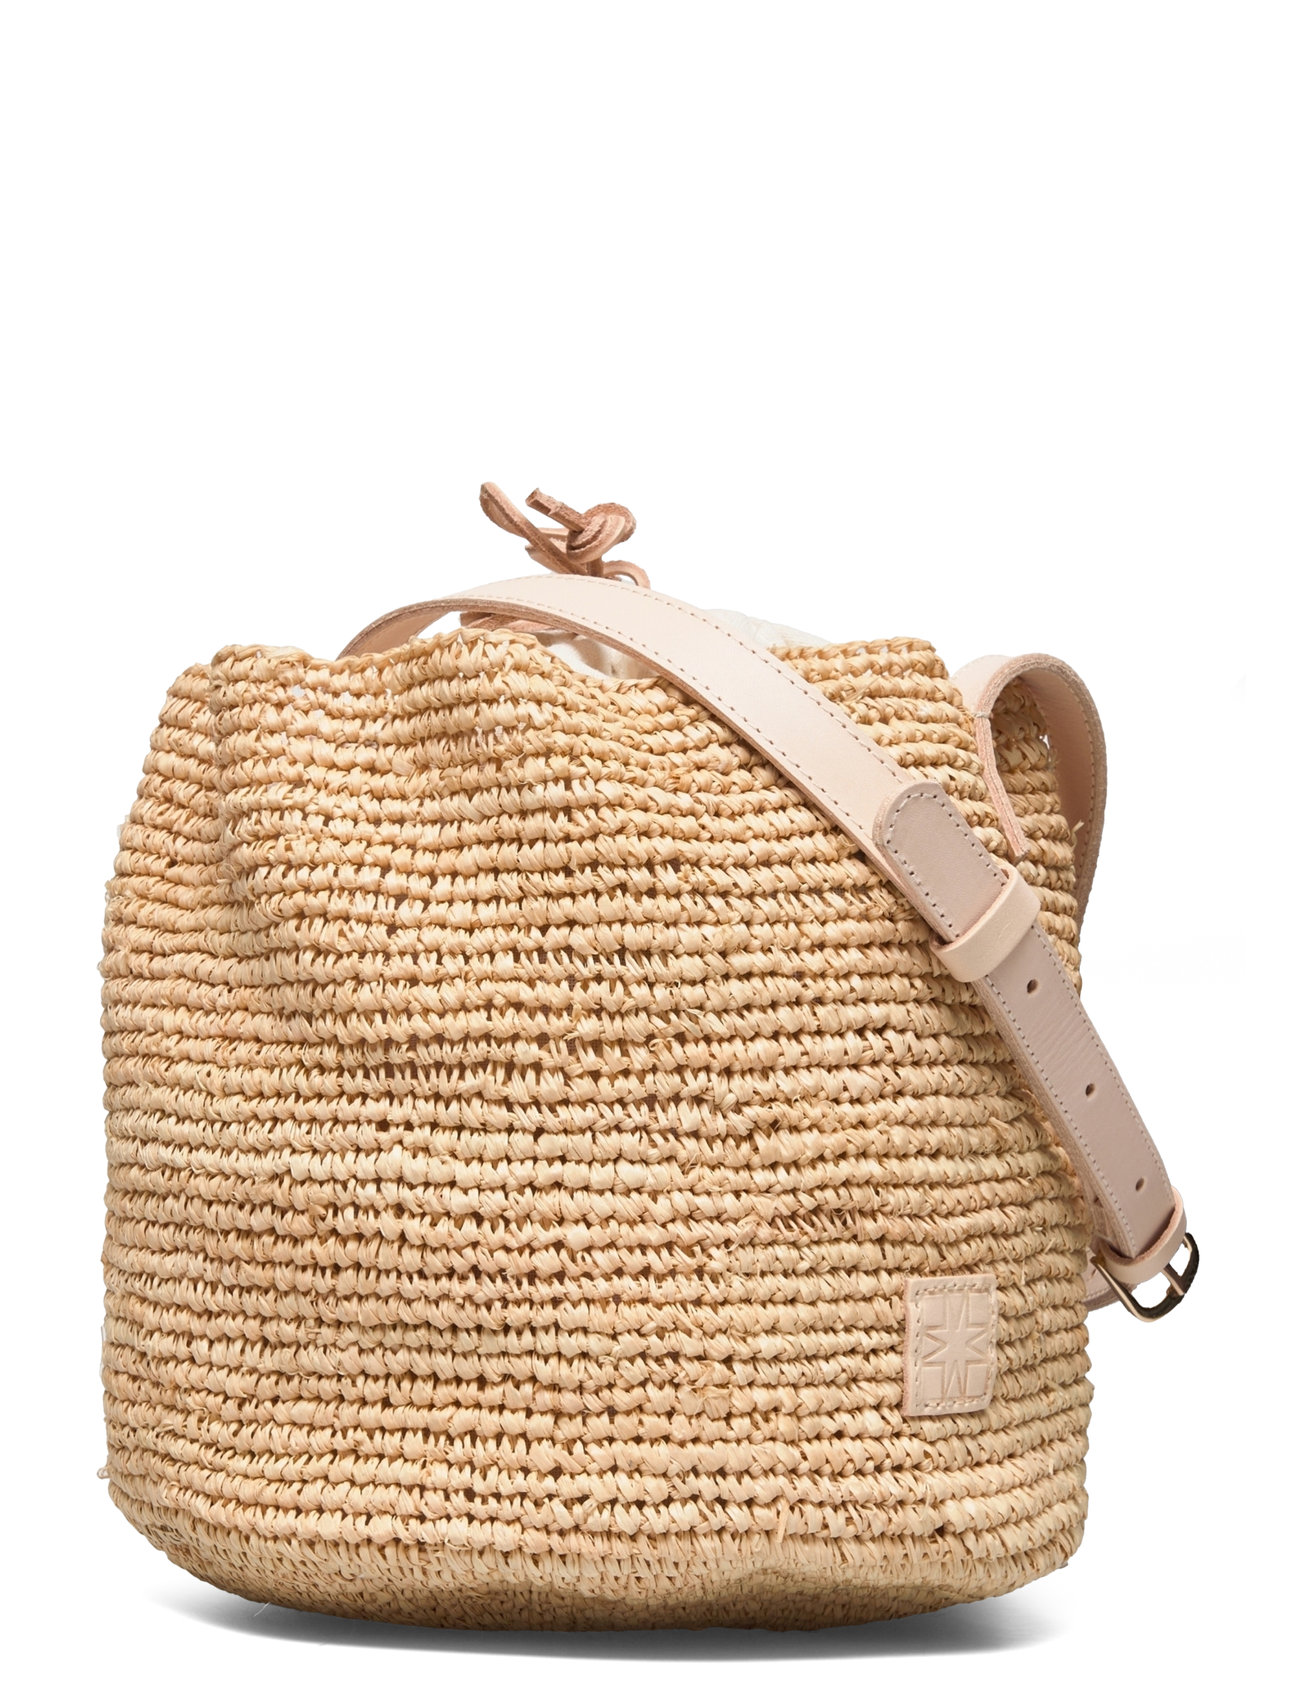 Eleni Rounded Straw Bag Designers Small Shoulder Bags-crossbody Bags Beige Malina